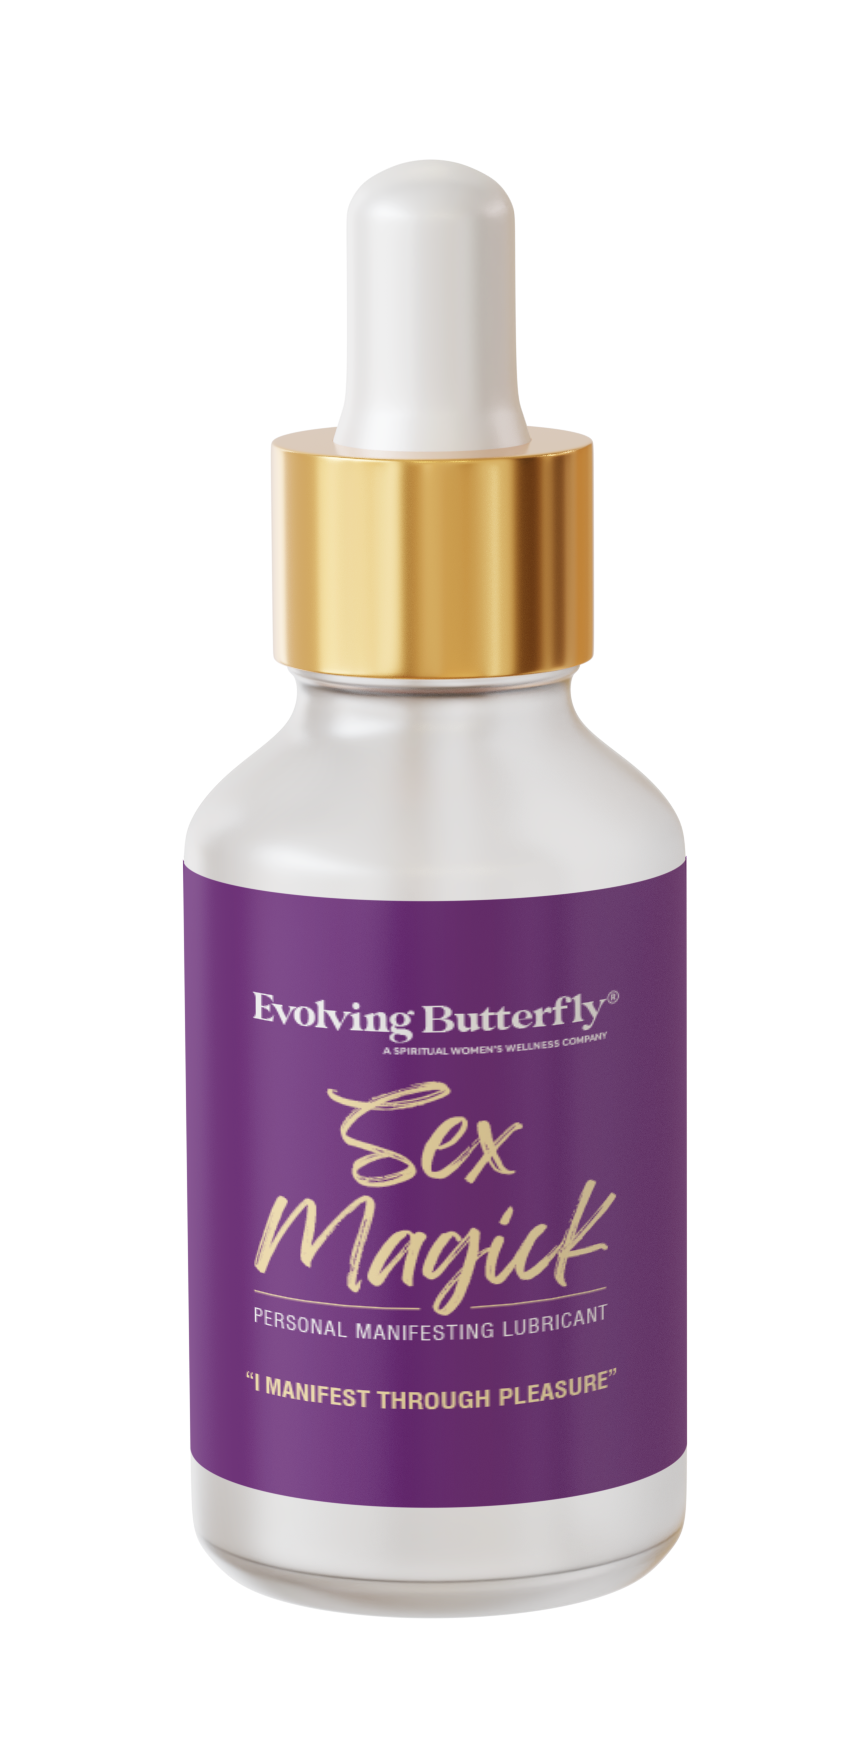 Sex Magick Personal Manifestation Lubricant And E Book Evolving Butterfly 5764